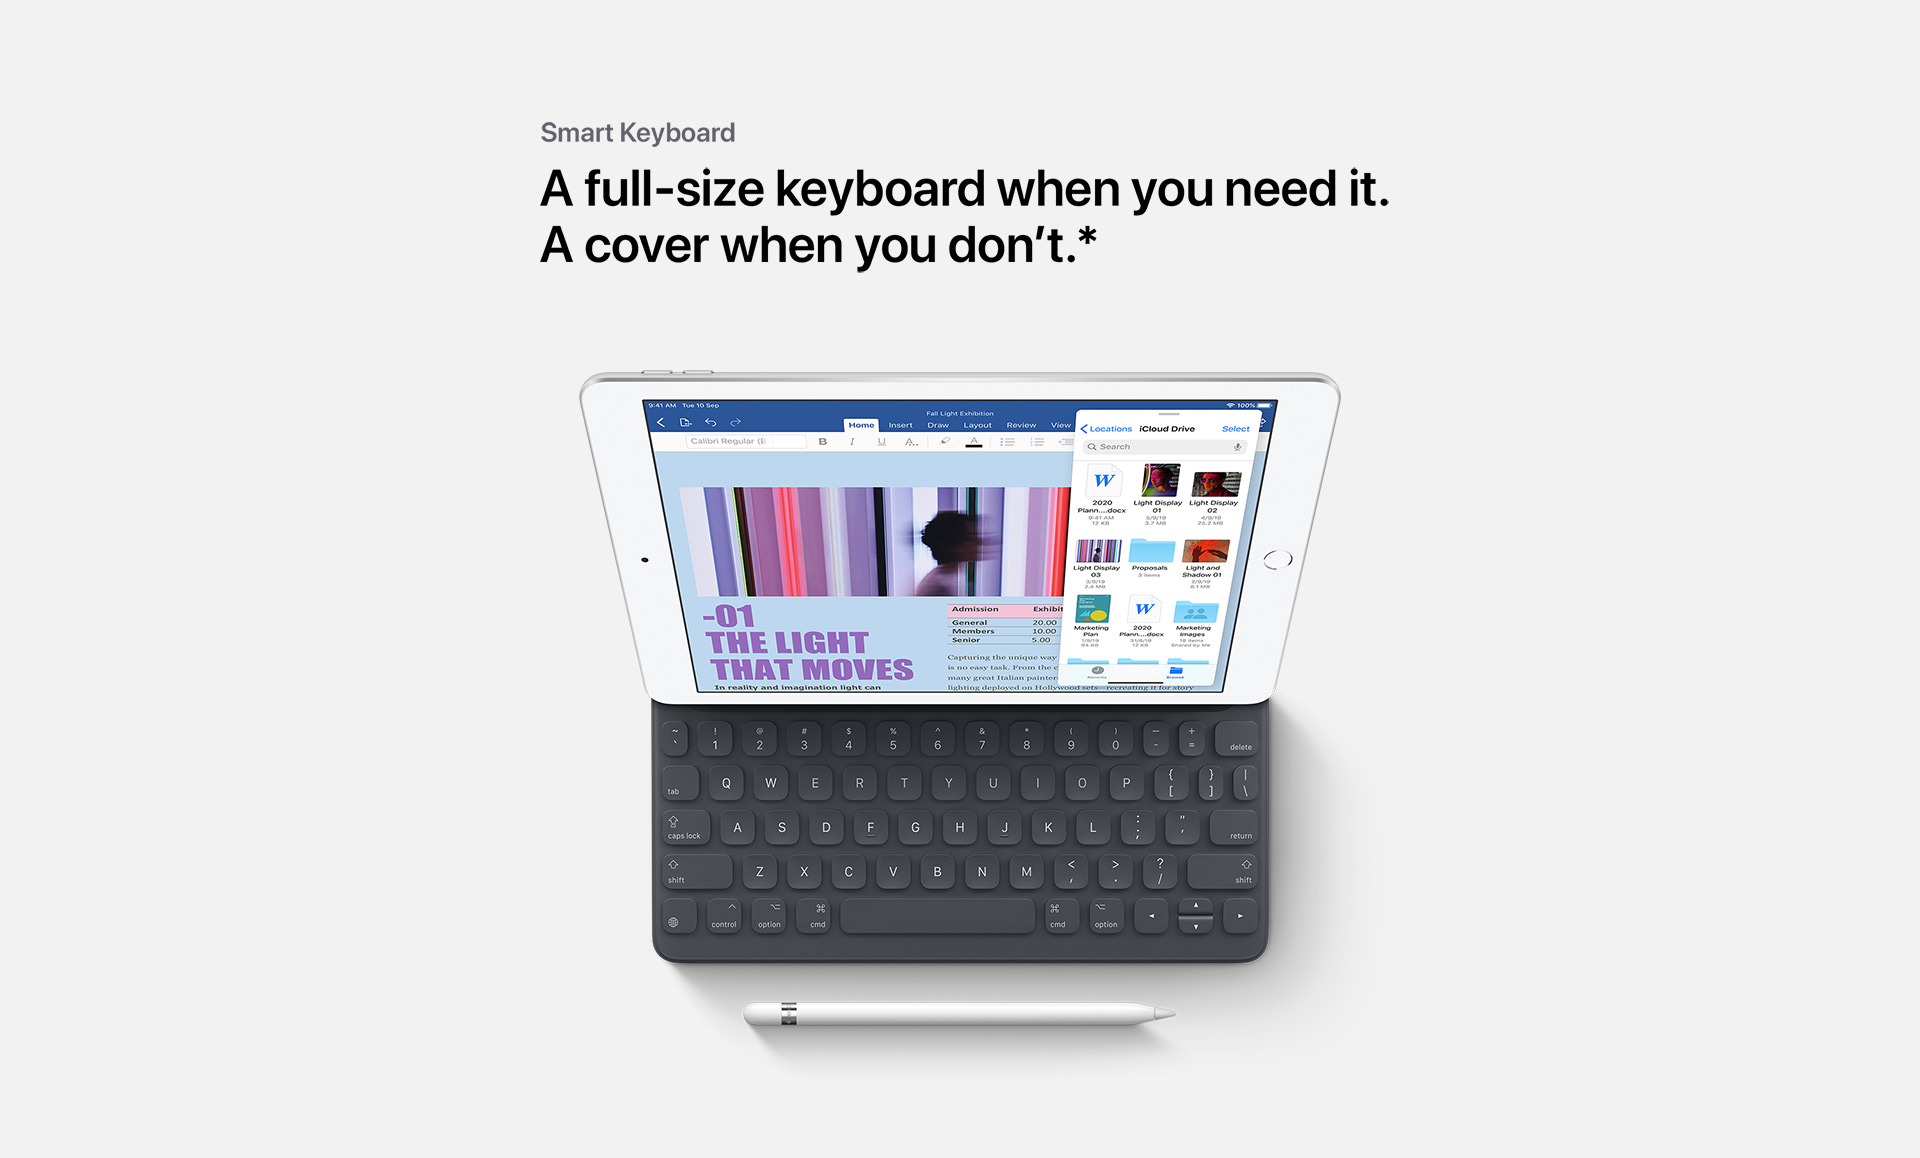 A full-size keyboard when you need it.